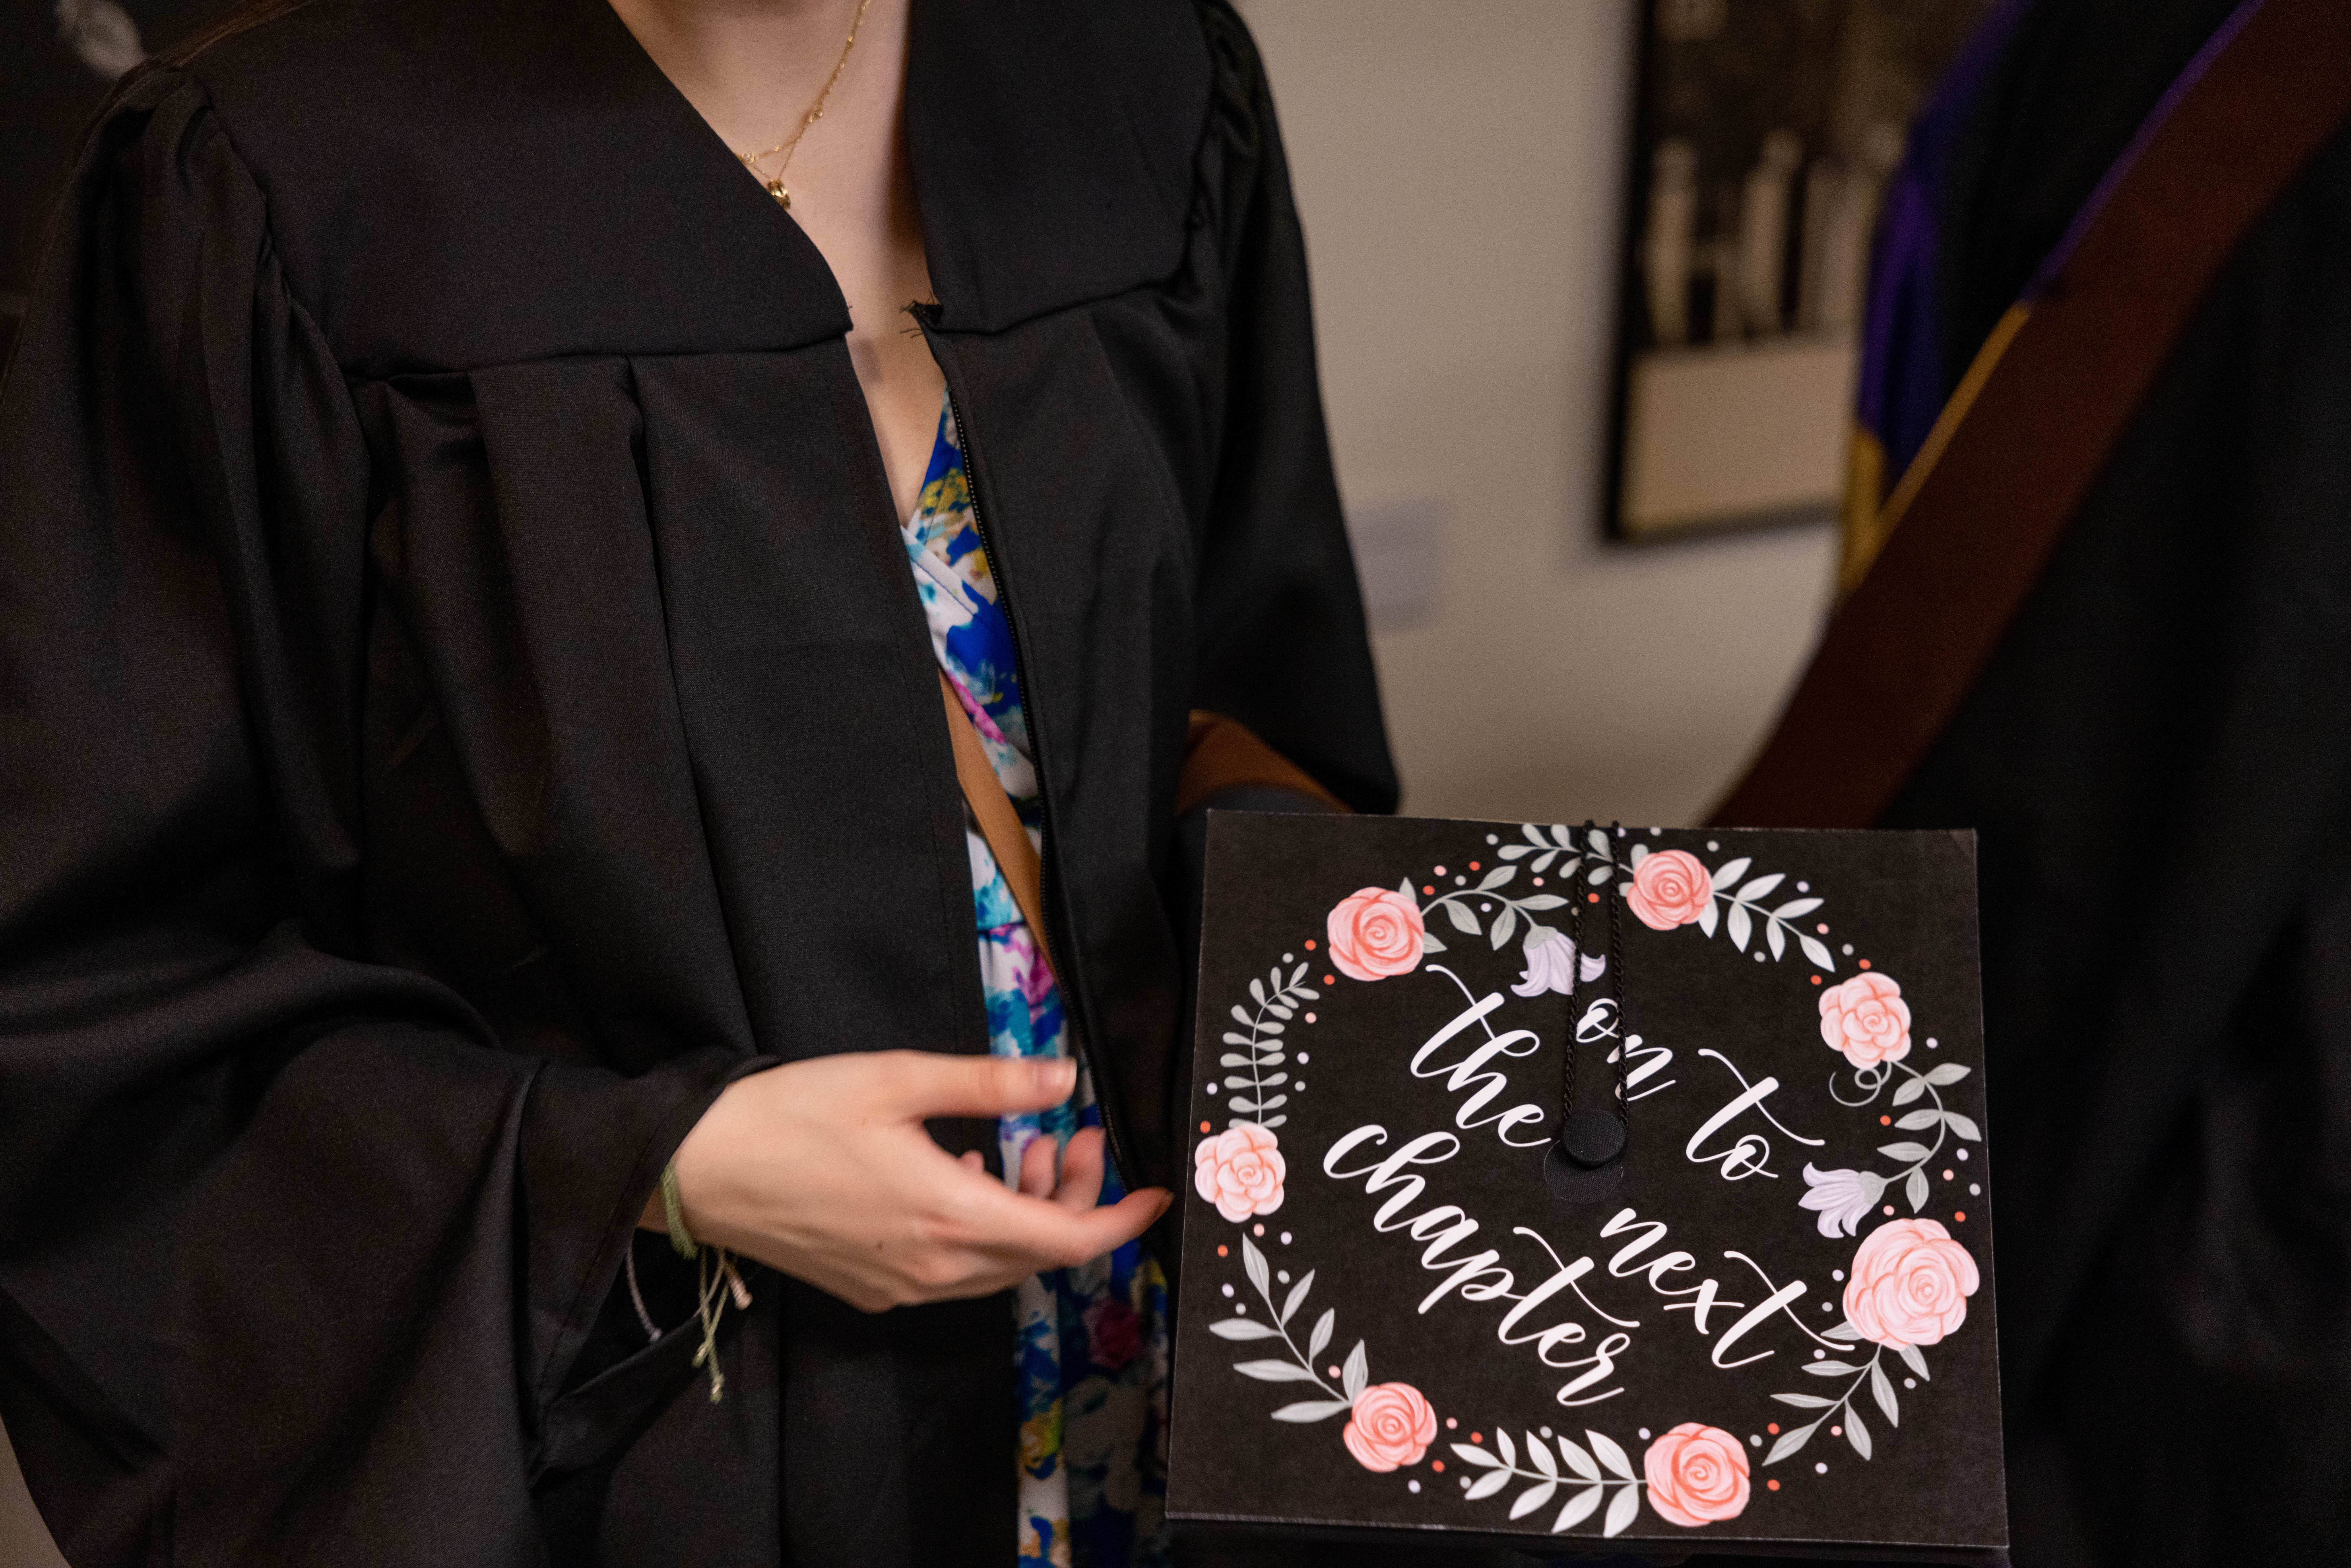 'On to the next chapter' adorns someone's graduation cap